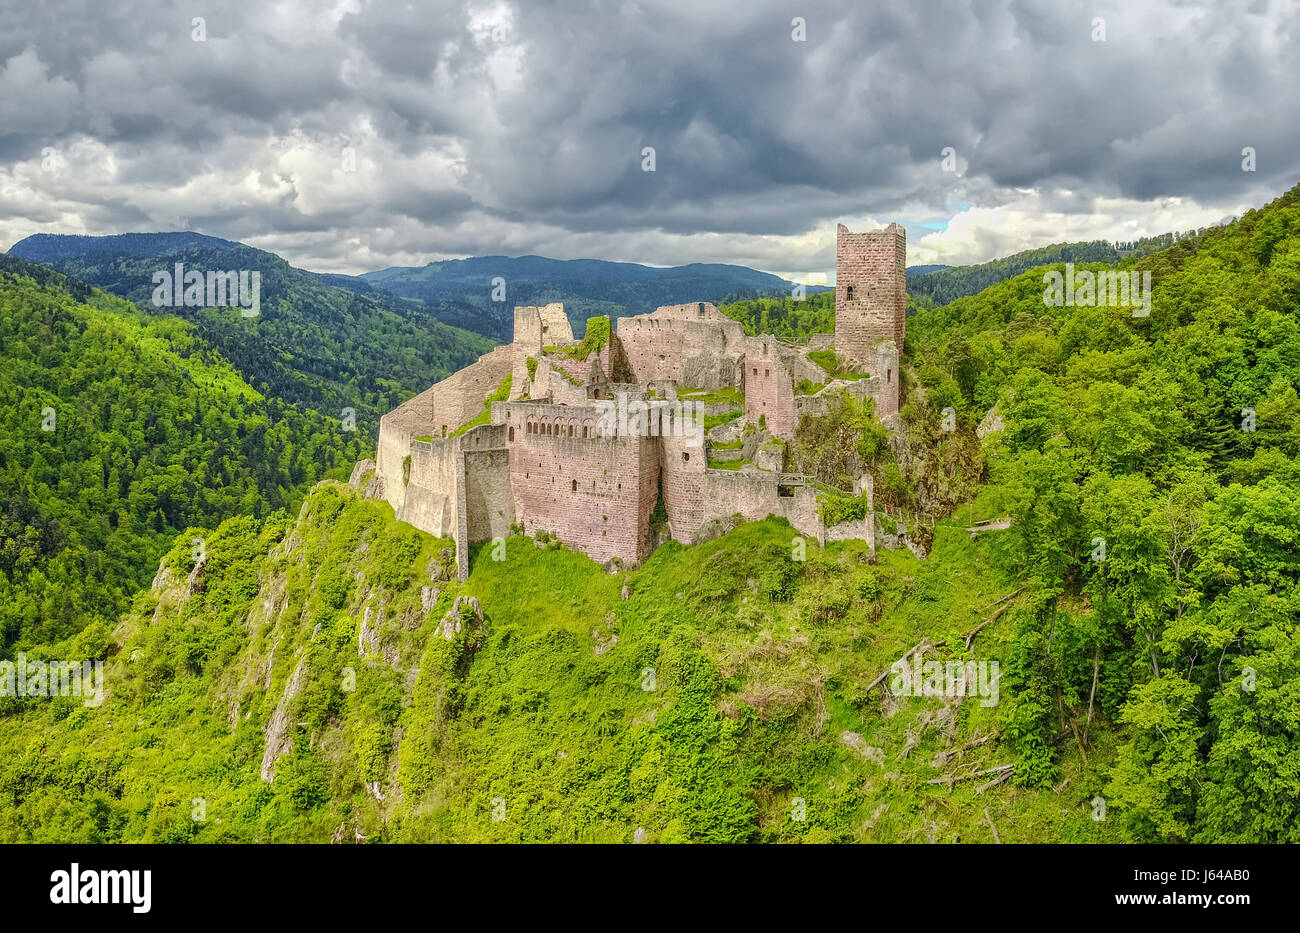 Ruins of Saint-Ulrich Castle located in The Vosges mountains near Ribeauville, Alsace, France Stock Photo